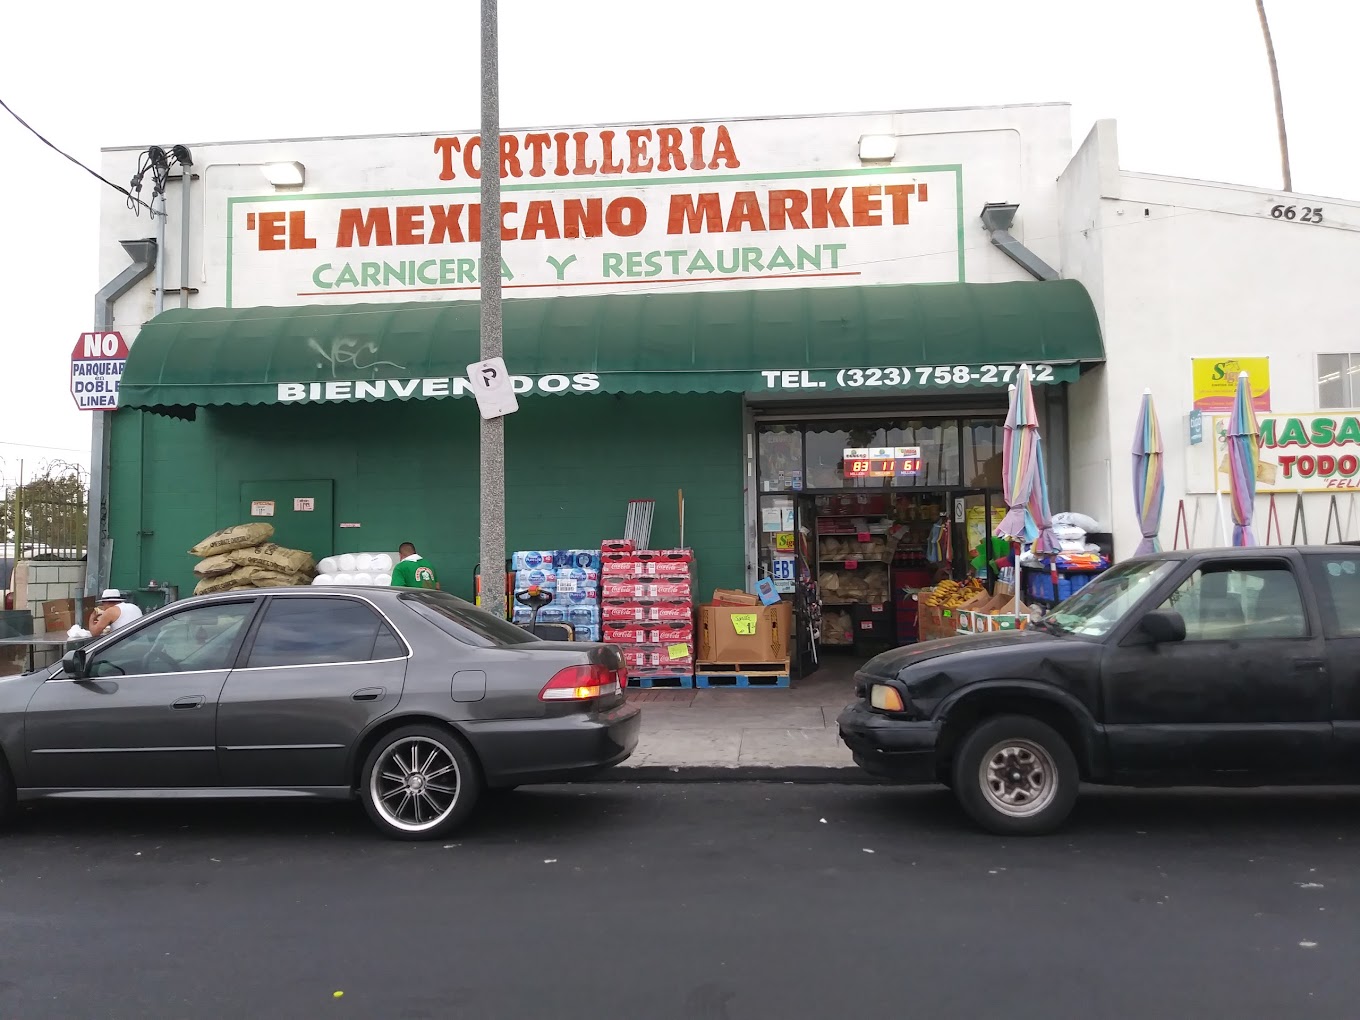 El Mexicano Market one of the top mexican grocery stores in Los Angeles